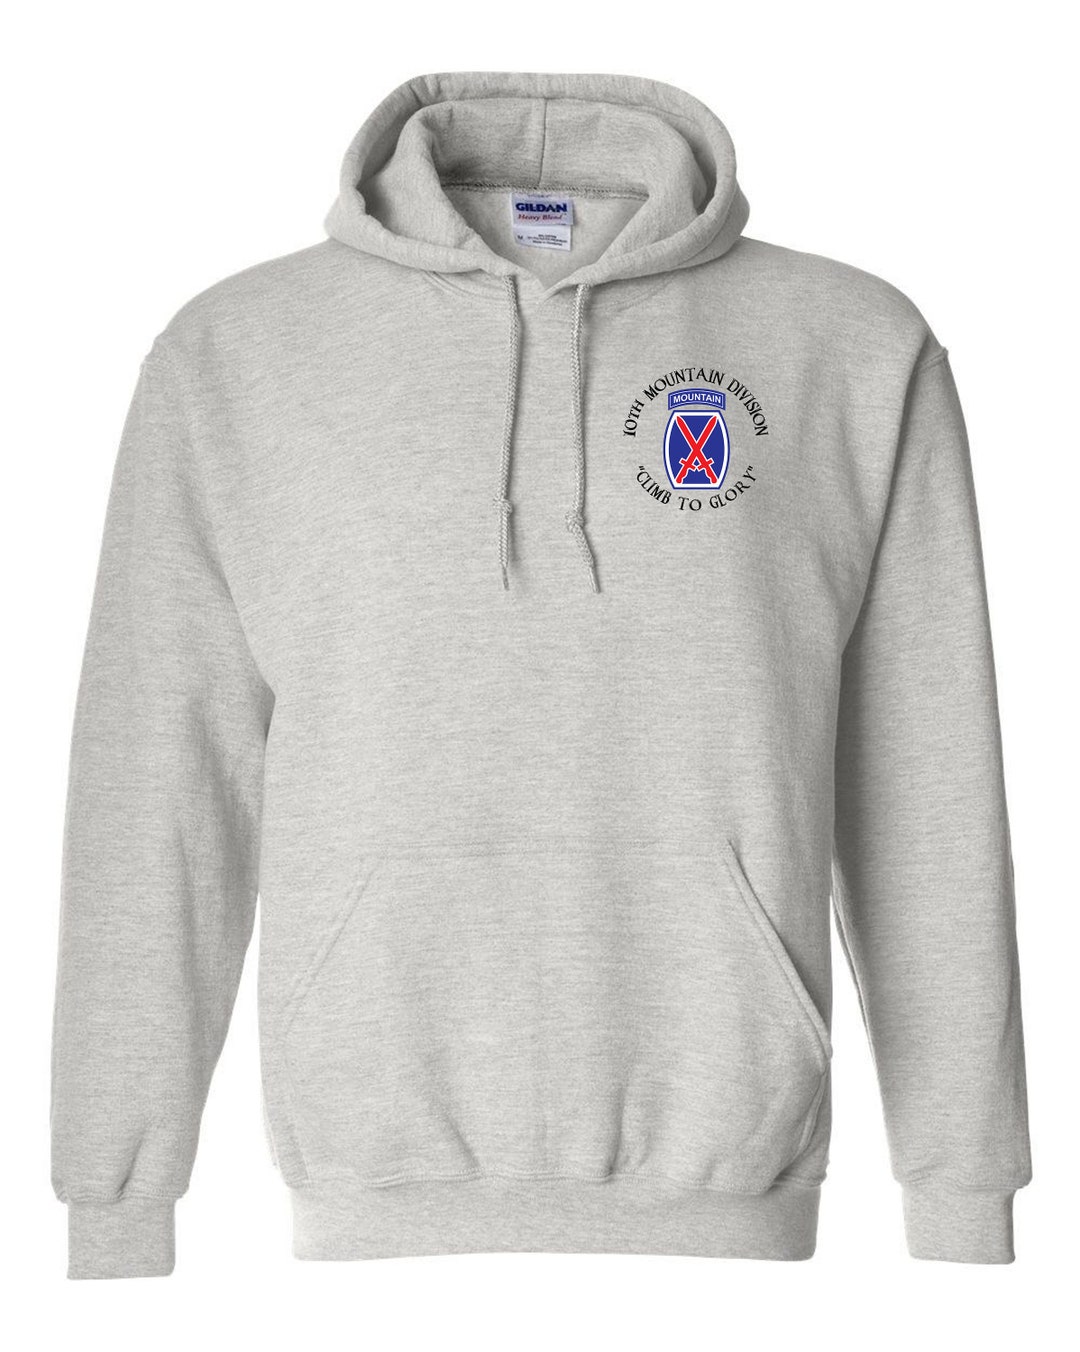 10th Mountain Division Embroidered Hooded Sweatshirt-3597 - Etsy